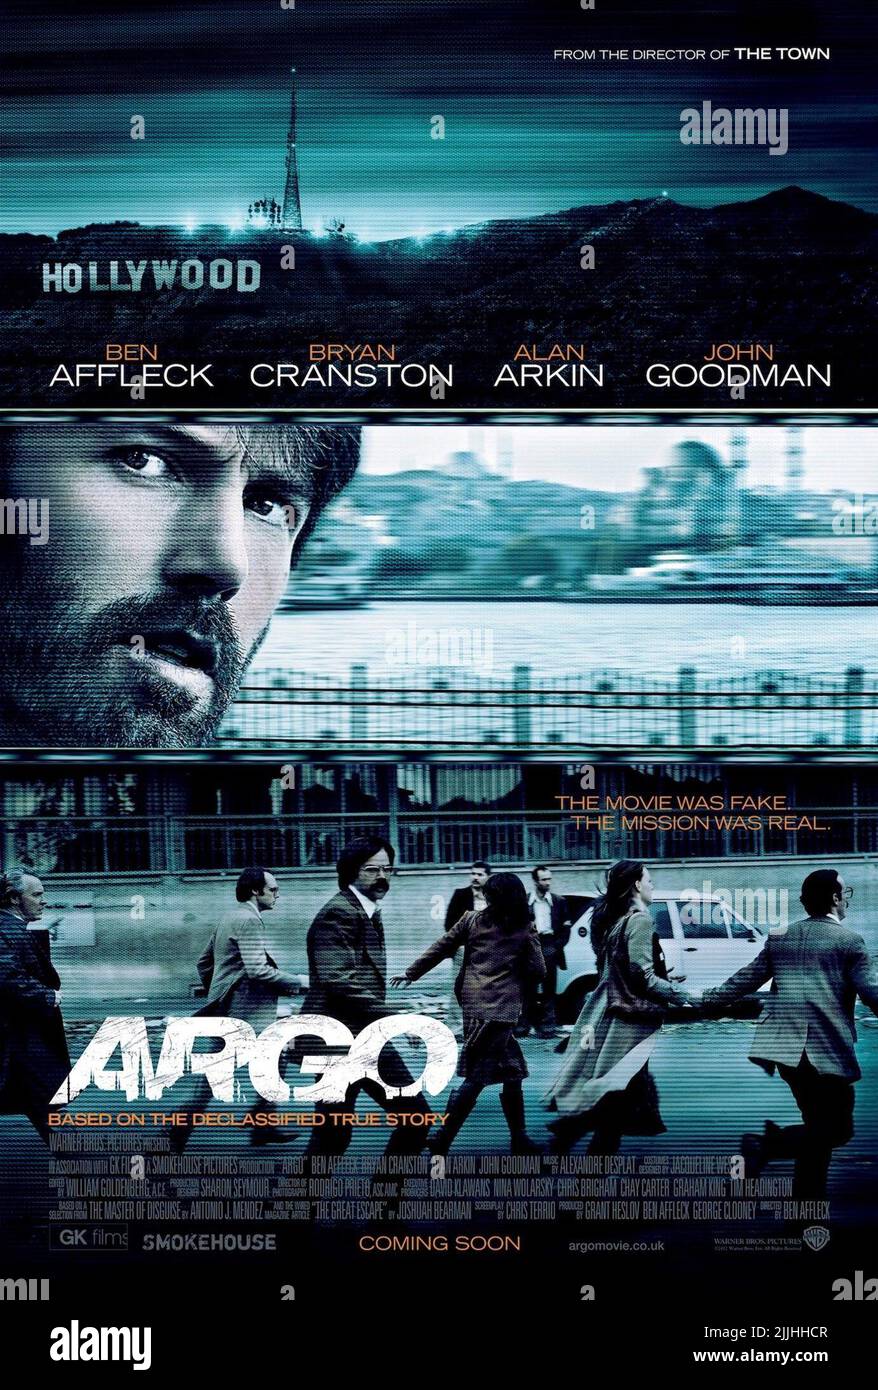 real argo poster 1980